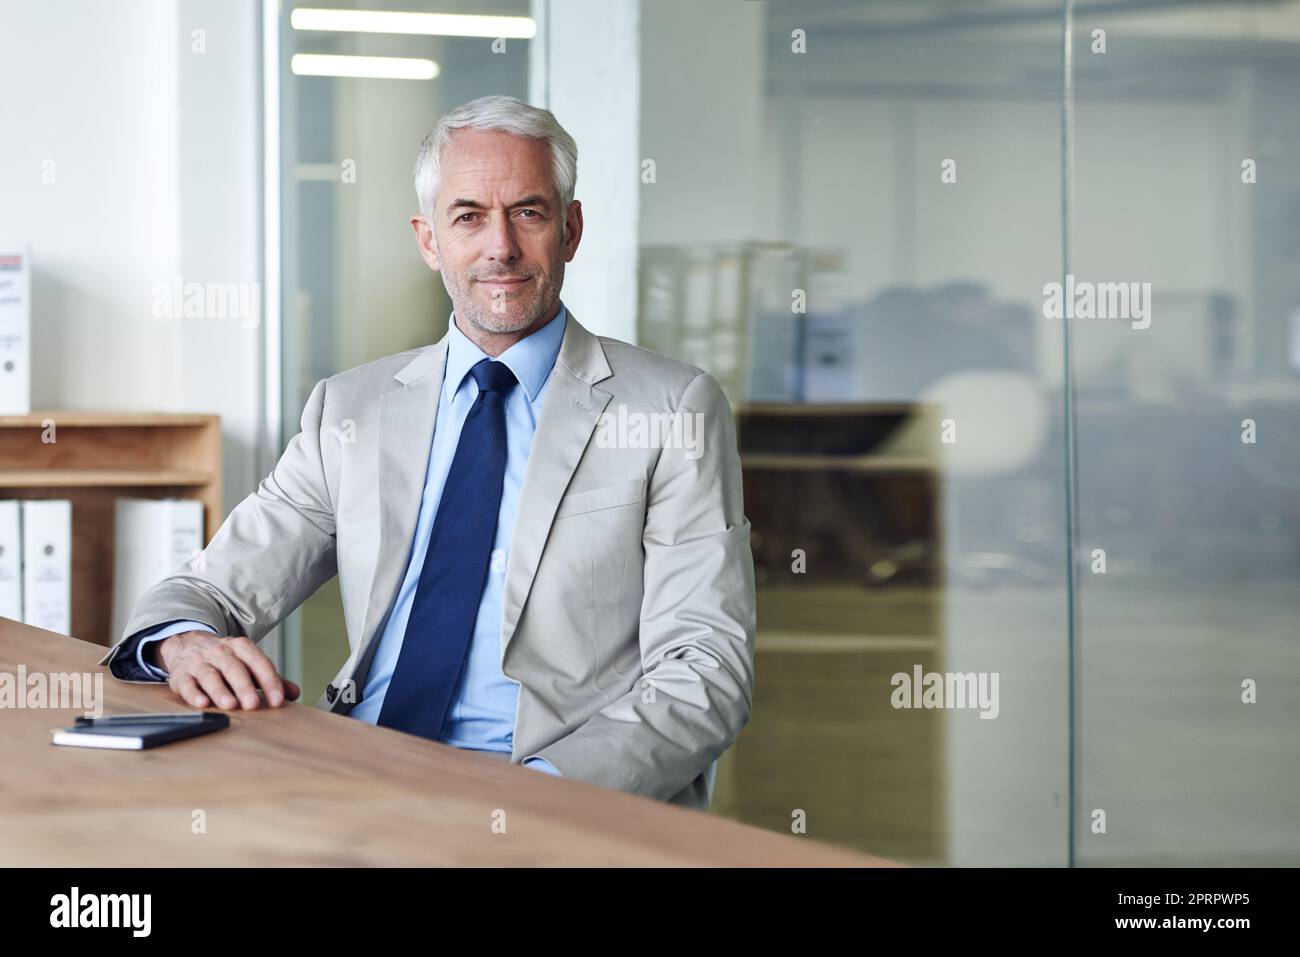 Building this company was a labor of love. Portrait of a mature businessman working on a laptop in an office. Stock Photo